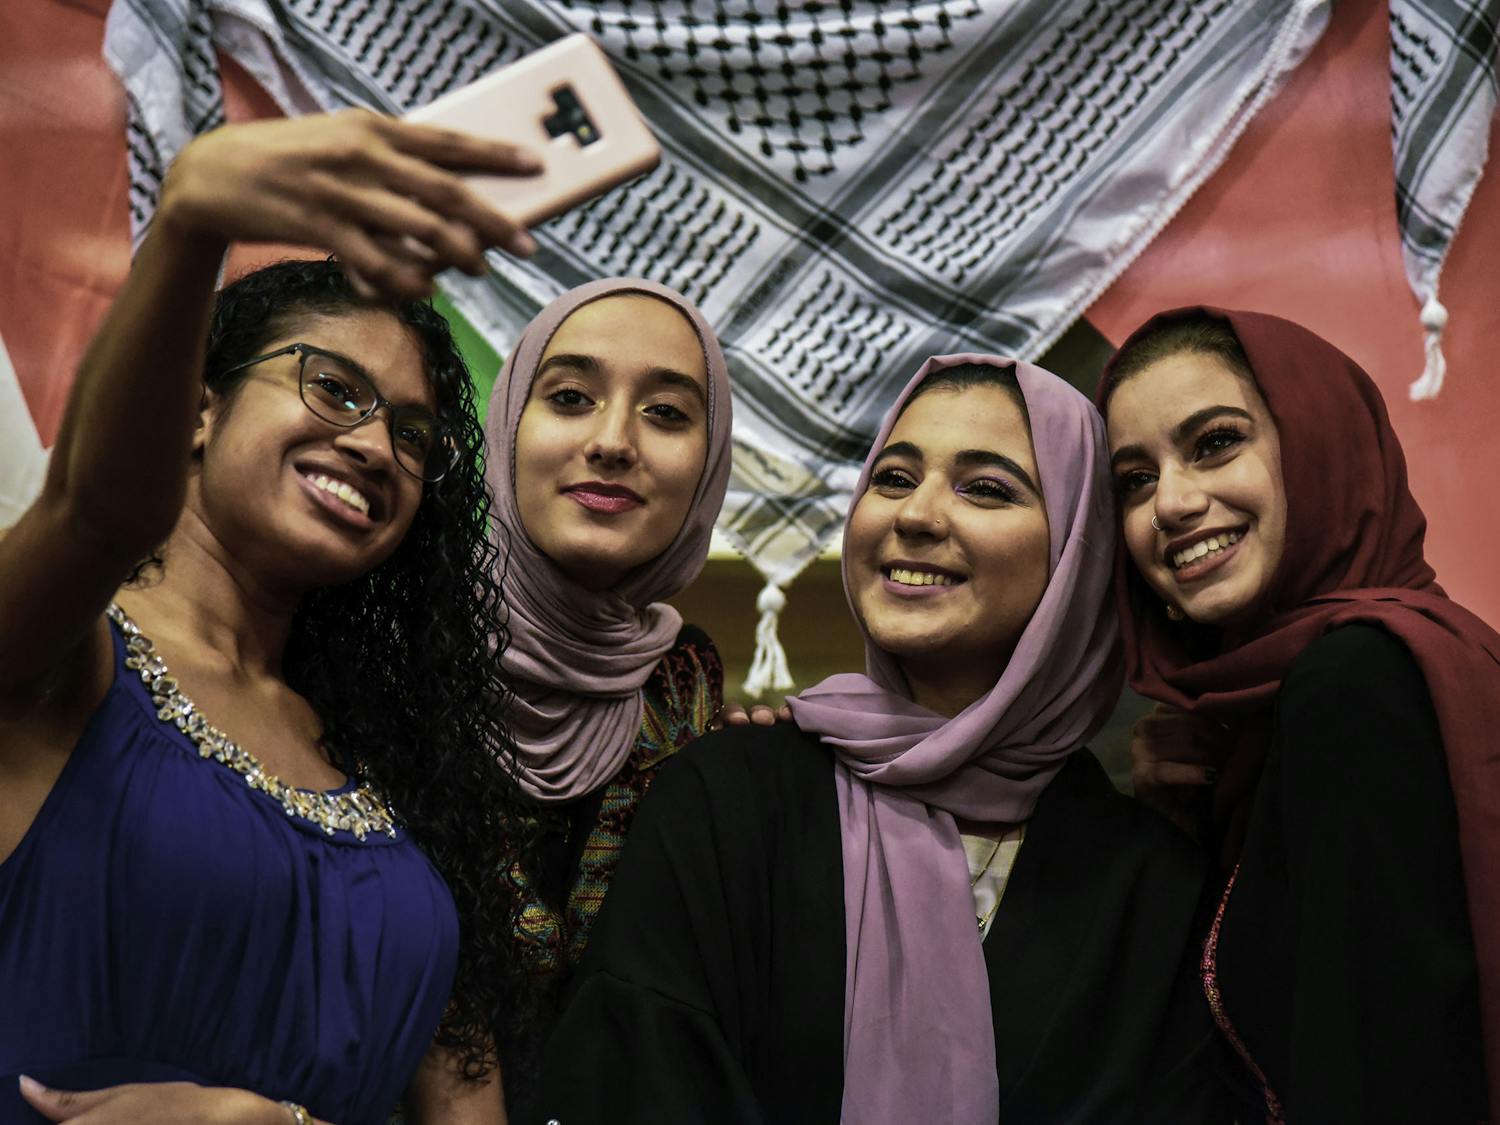 On Saturday, the Arab Students' Association held its first annual Charity Gala hosted in the Holloway Touchdown Terrace at Ben Hill Griffin Stadium. This year, 100% of proceeds will be donated to the Palestinian Children’s Relief Fund, an organization that brings Palestinian children free medical care they are unable to get locally. 